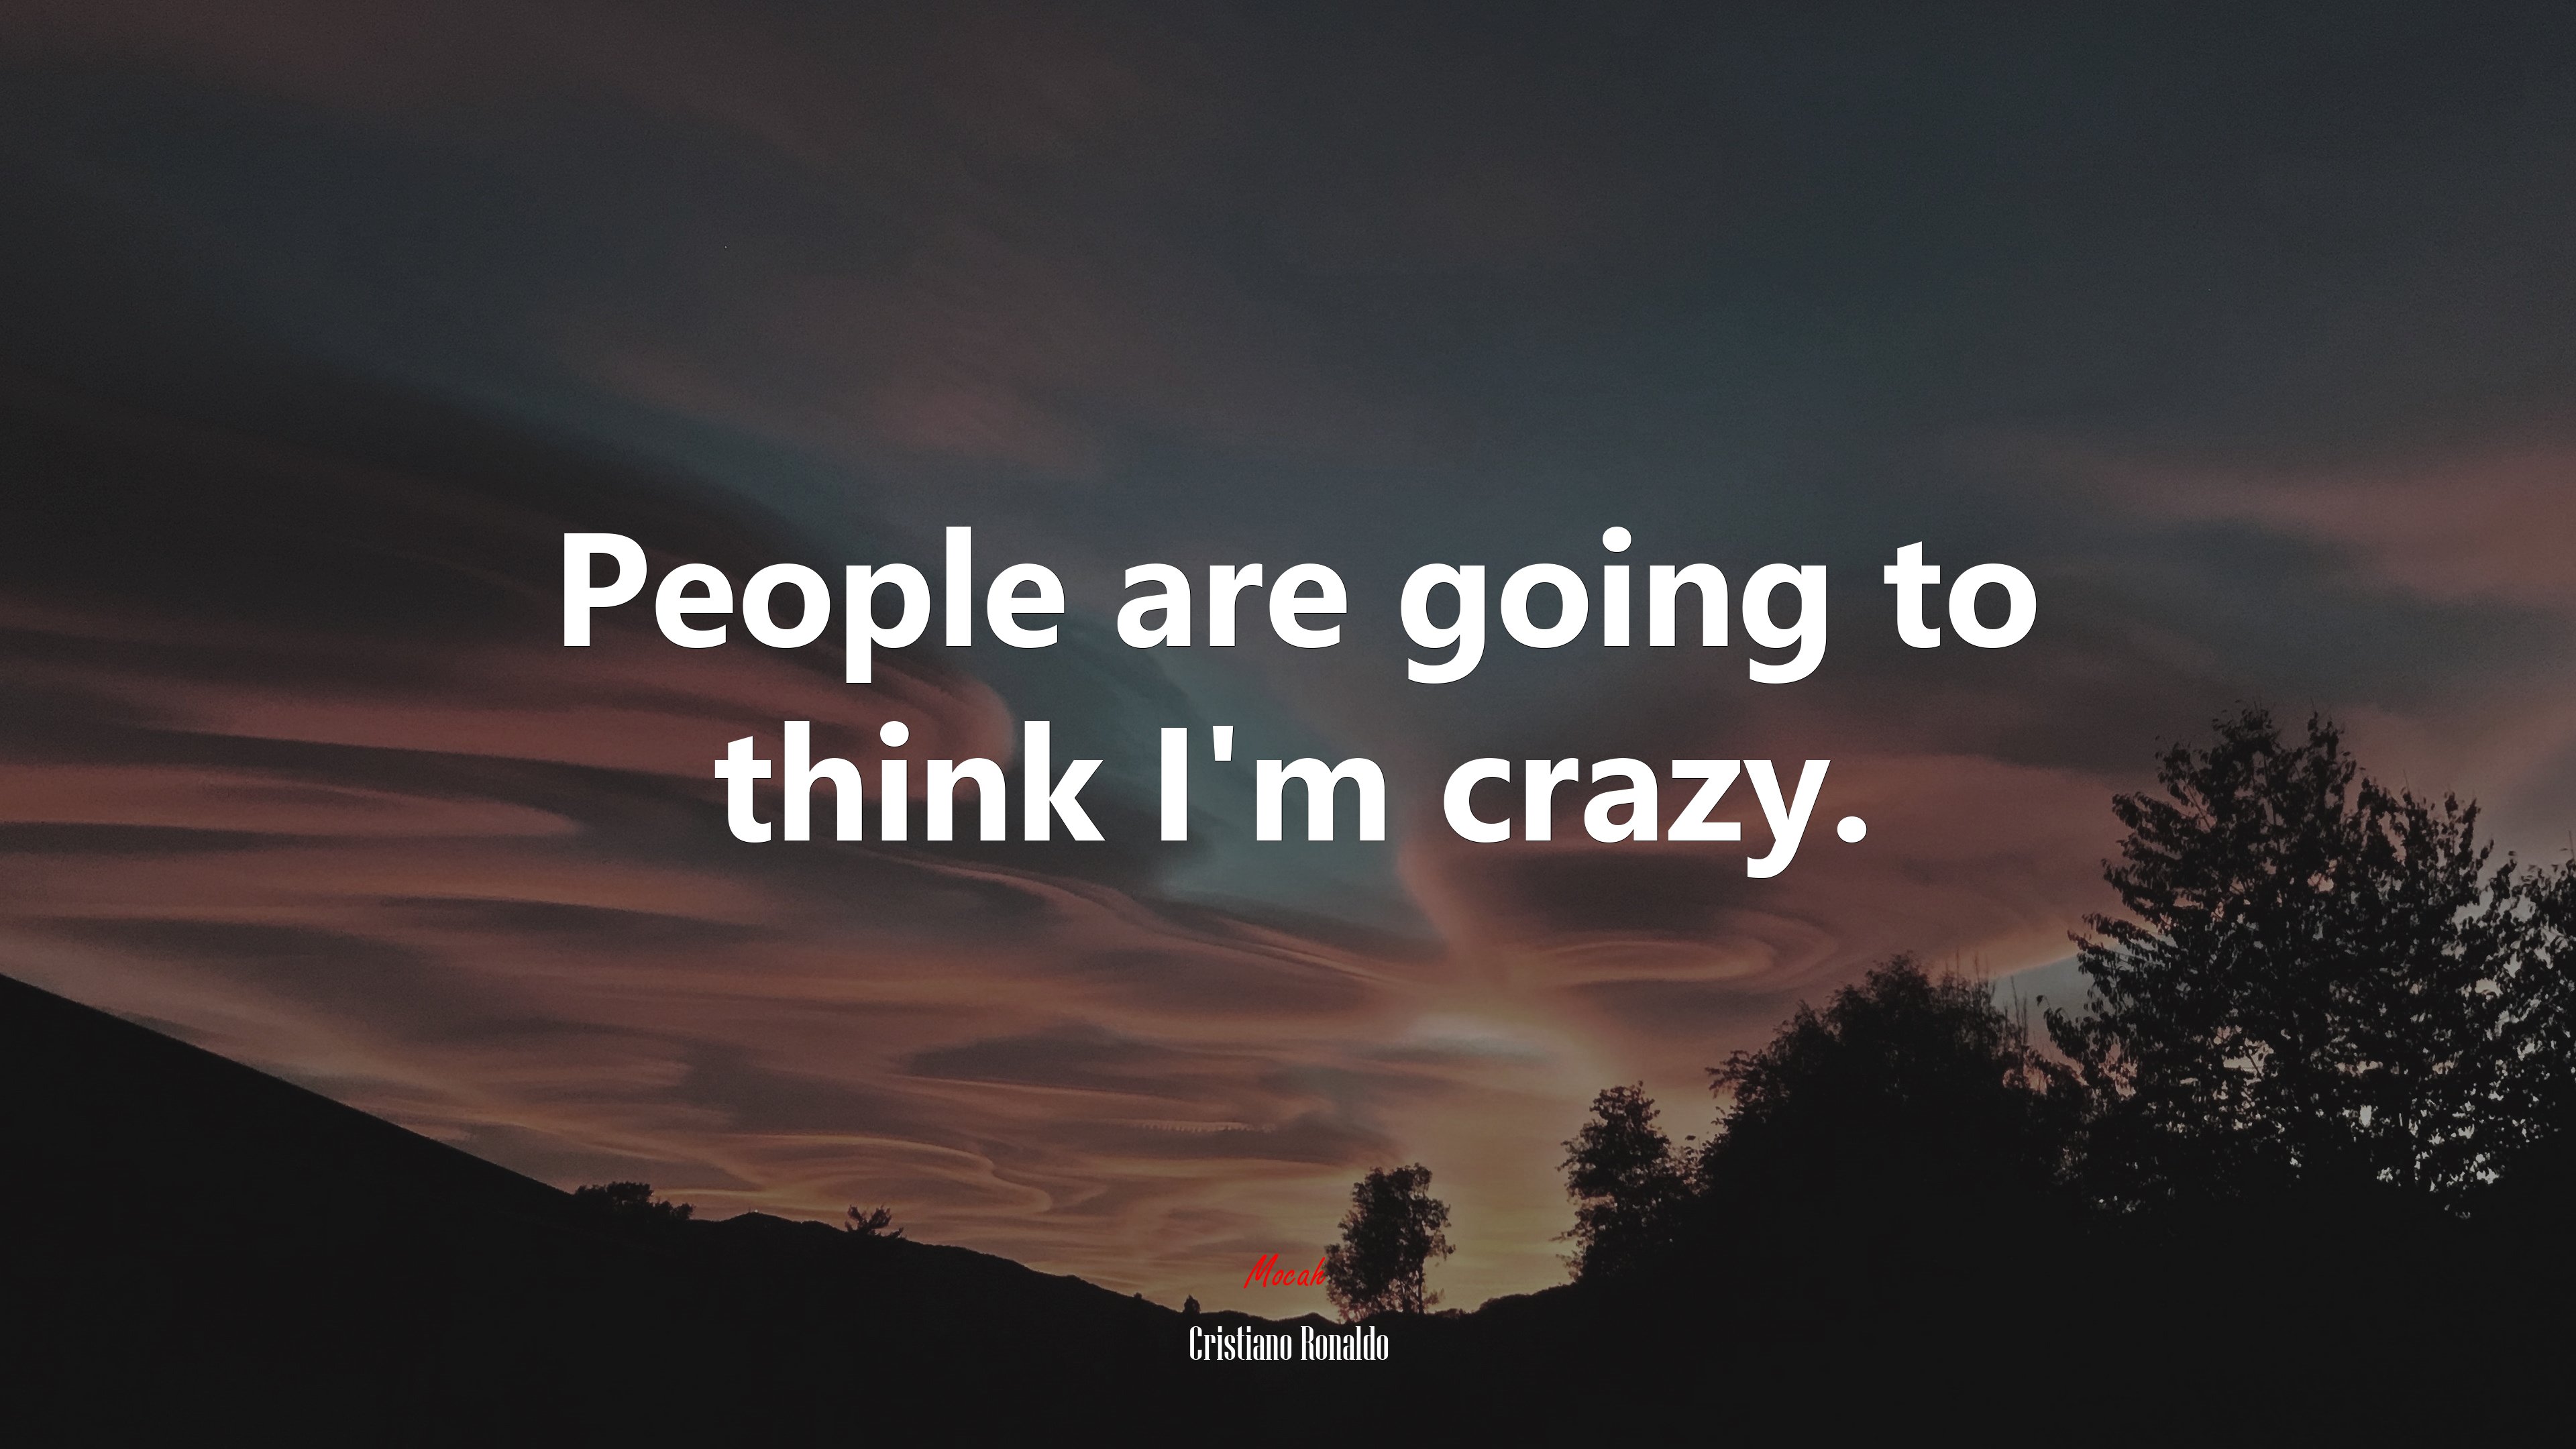 People are going to think I'm crazy. Cristiano Ronaldo quote, 4k wallpaper HD Wallpaper